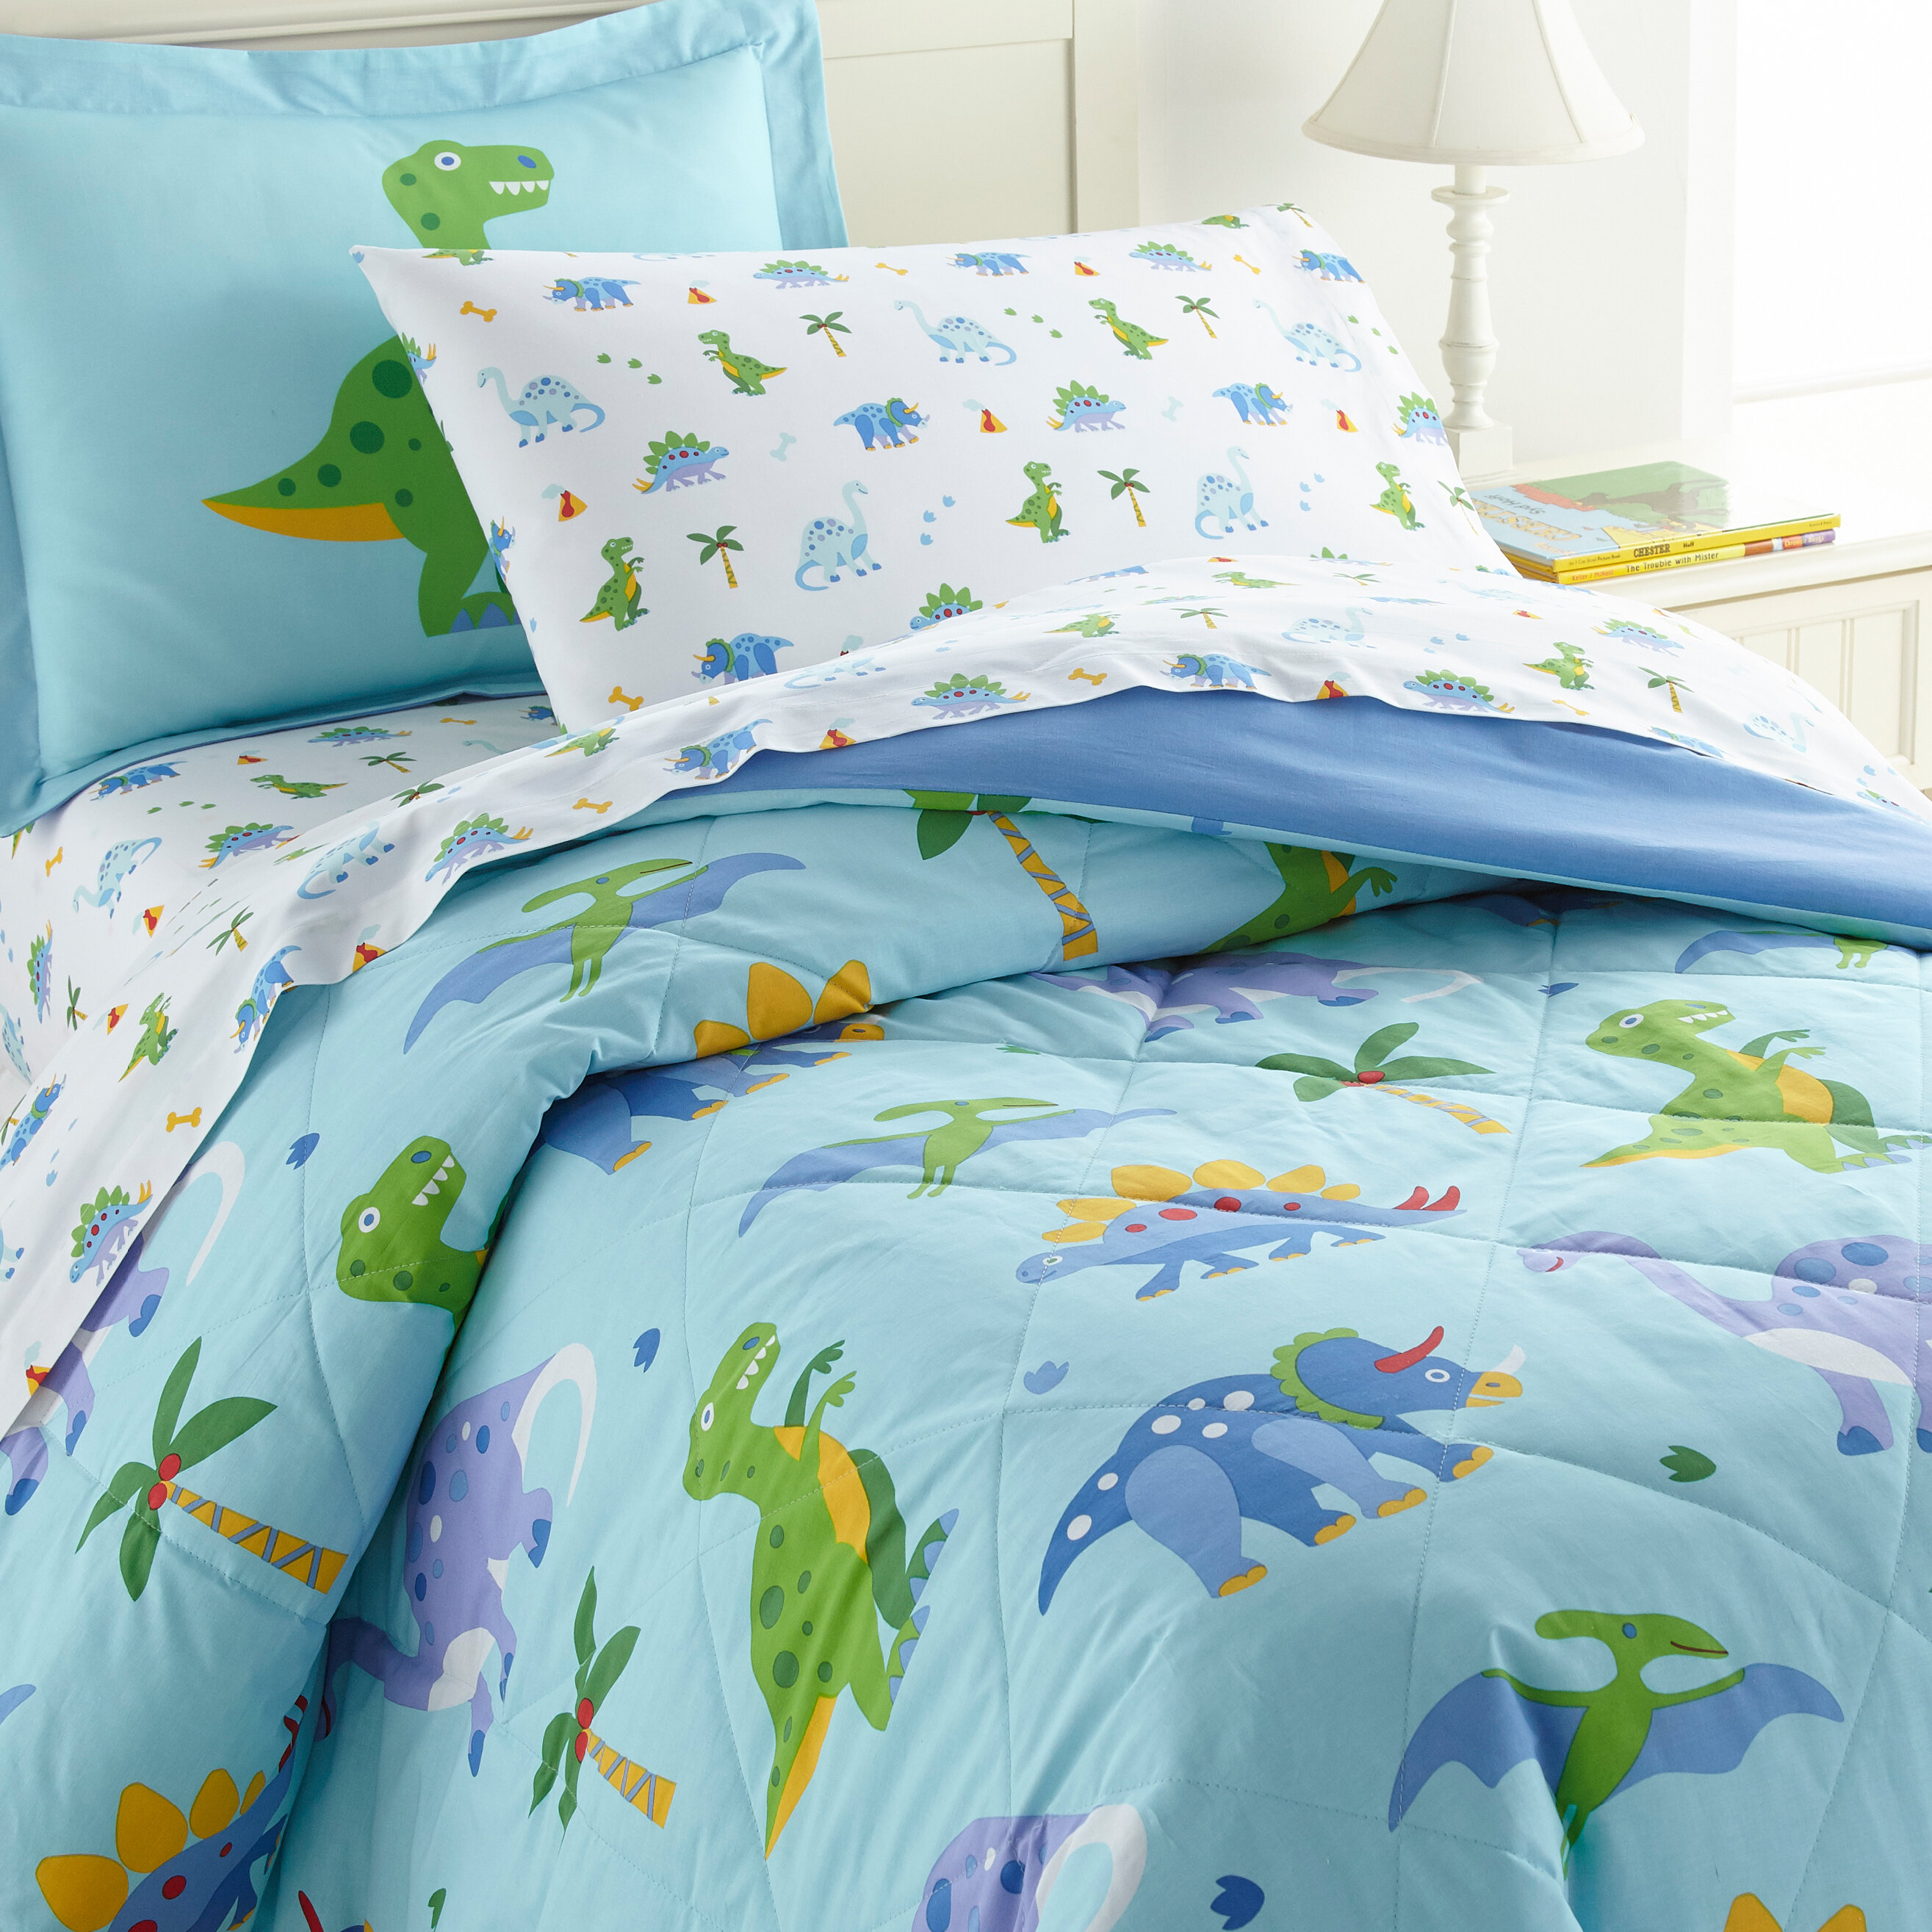 Bed in a Bag 7 Pieces Queen Size Reversible Bed Comforter Set for All Season Blue Dinosaur Print 1 Comforter, 2 Pillow Shams, 1 Flat Sheet, 1 Fitted Sheet, 2 Pillowcases 